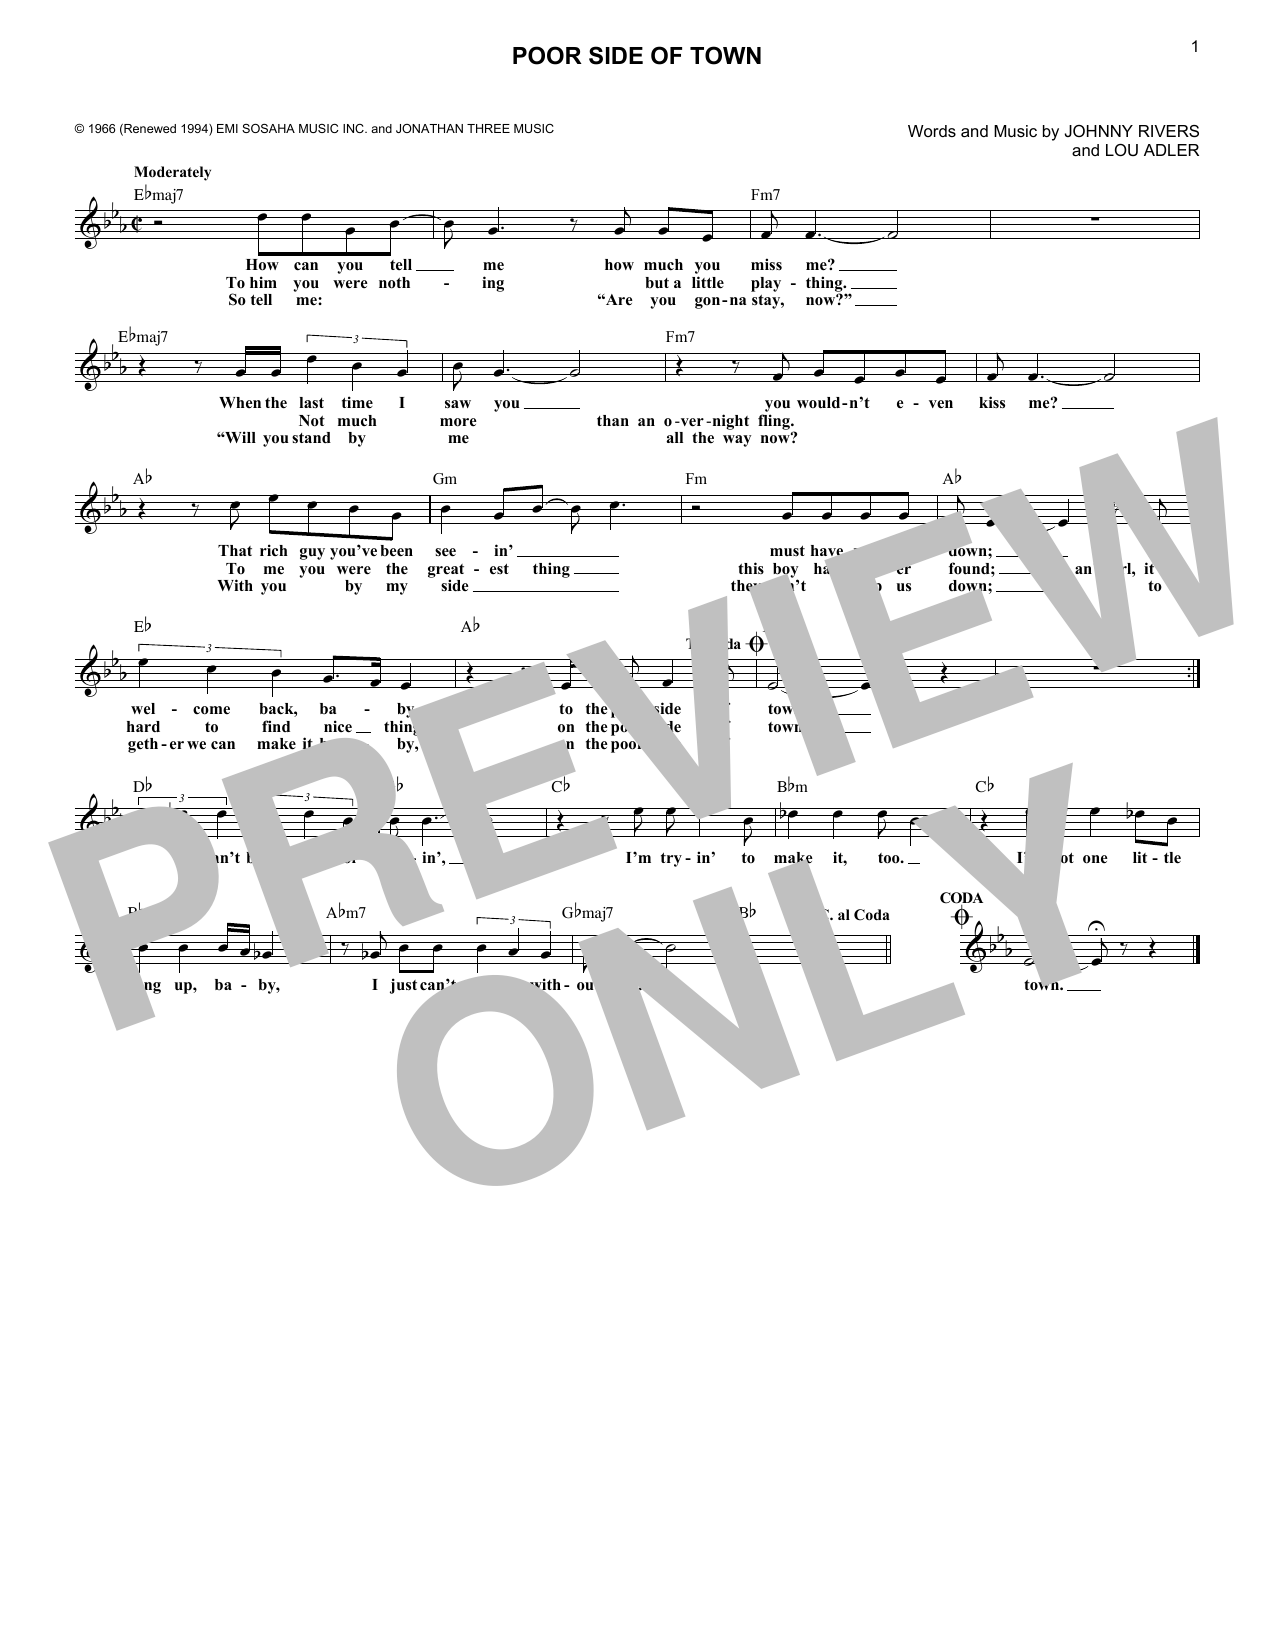 Download Johnny Rivers Poor Side Of Town Sheet Music